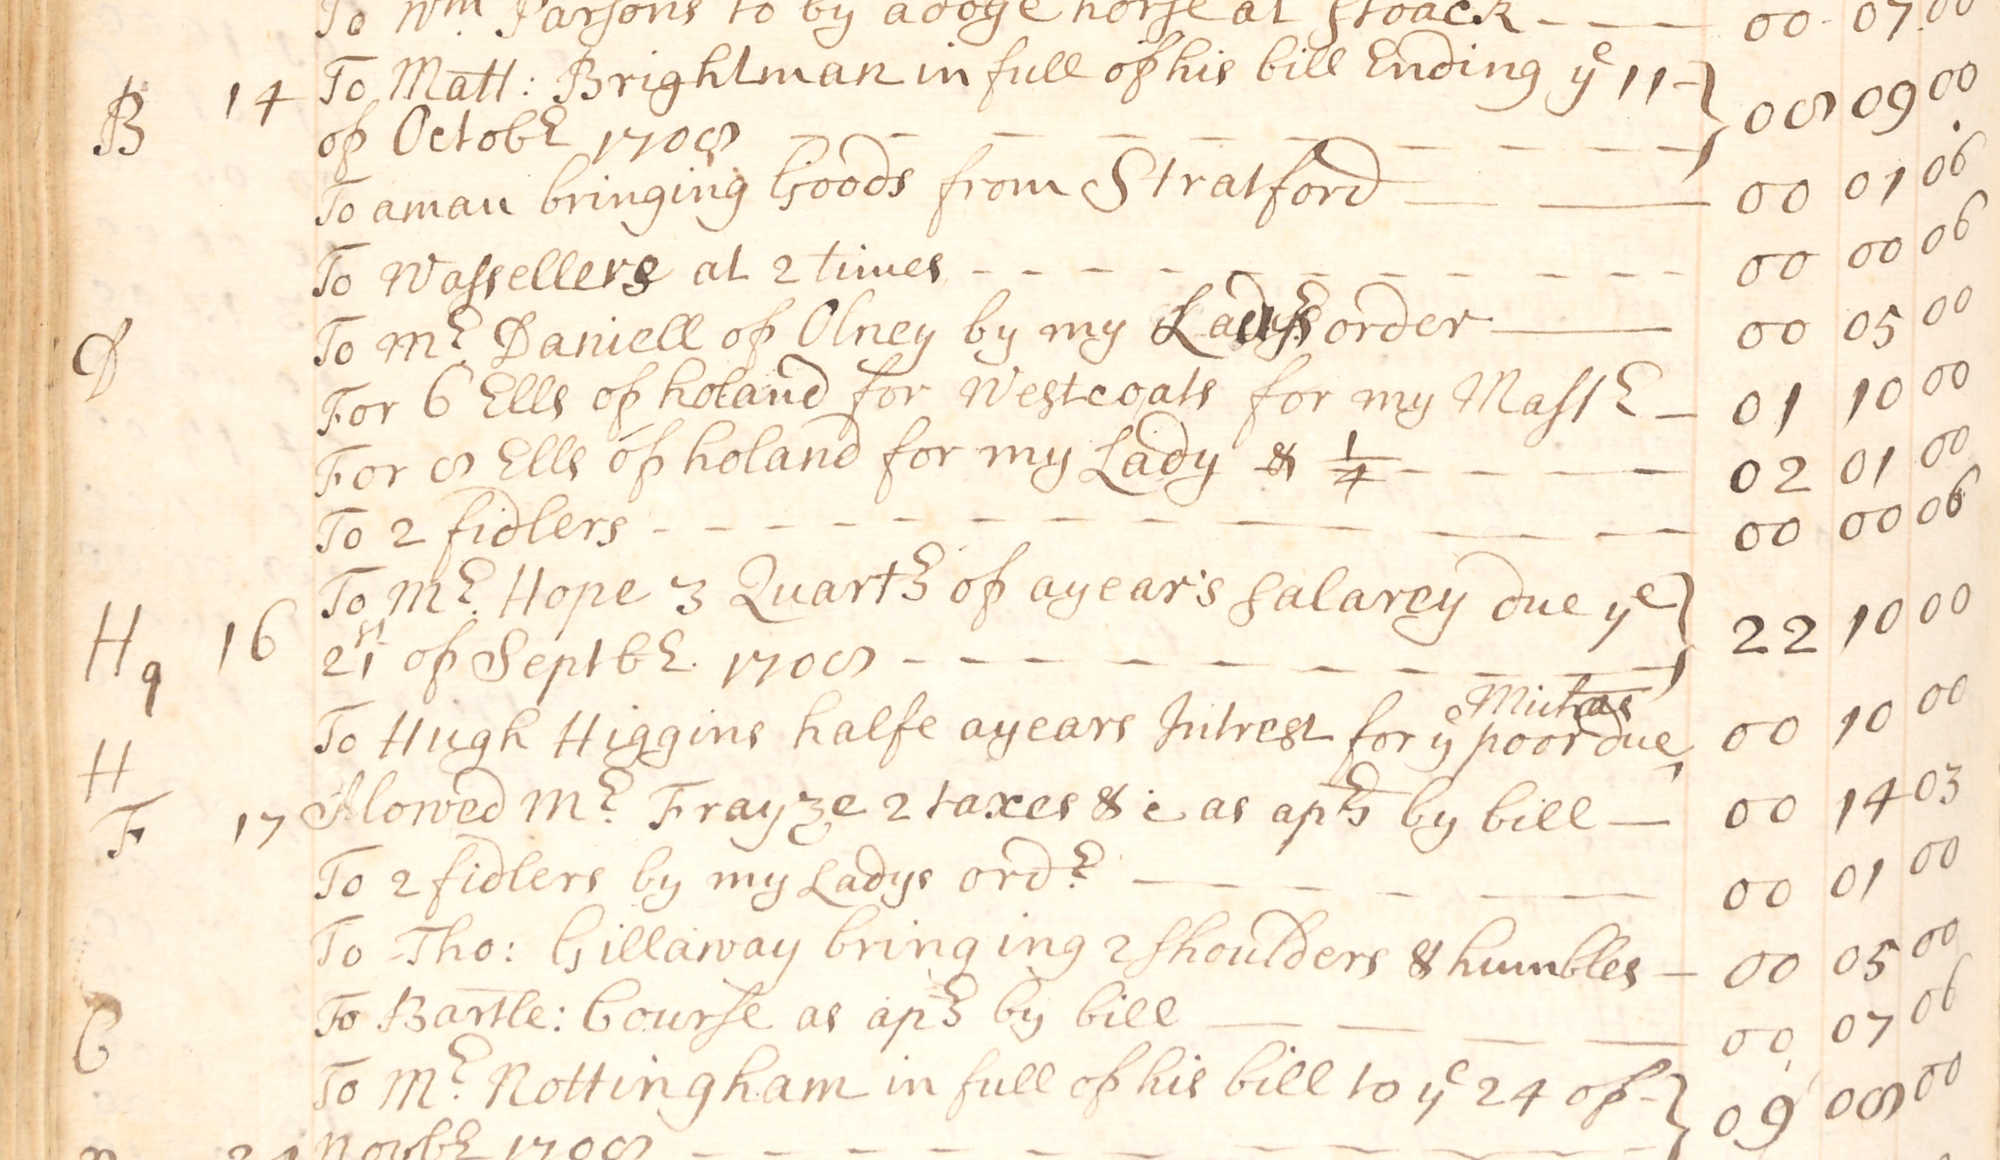 1708 document in handwritten English referring to wassellers and fiddlers